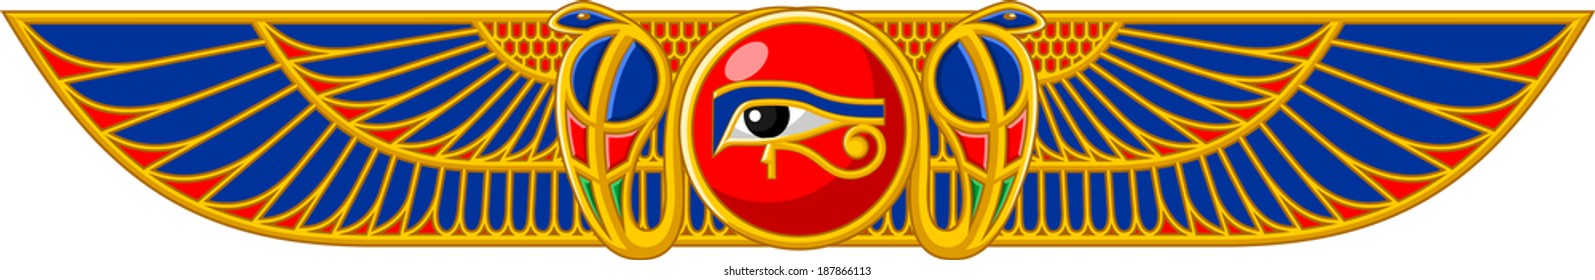 Illustration Of Ancient Egyptian Sun With Snakes And Wings Isolated On White Background.